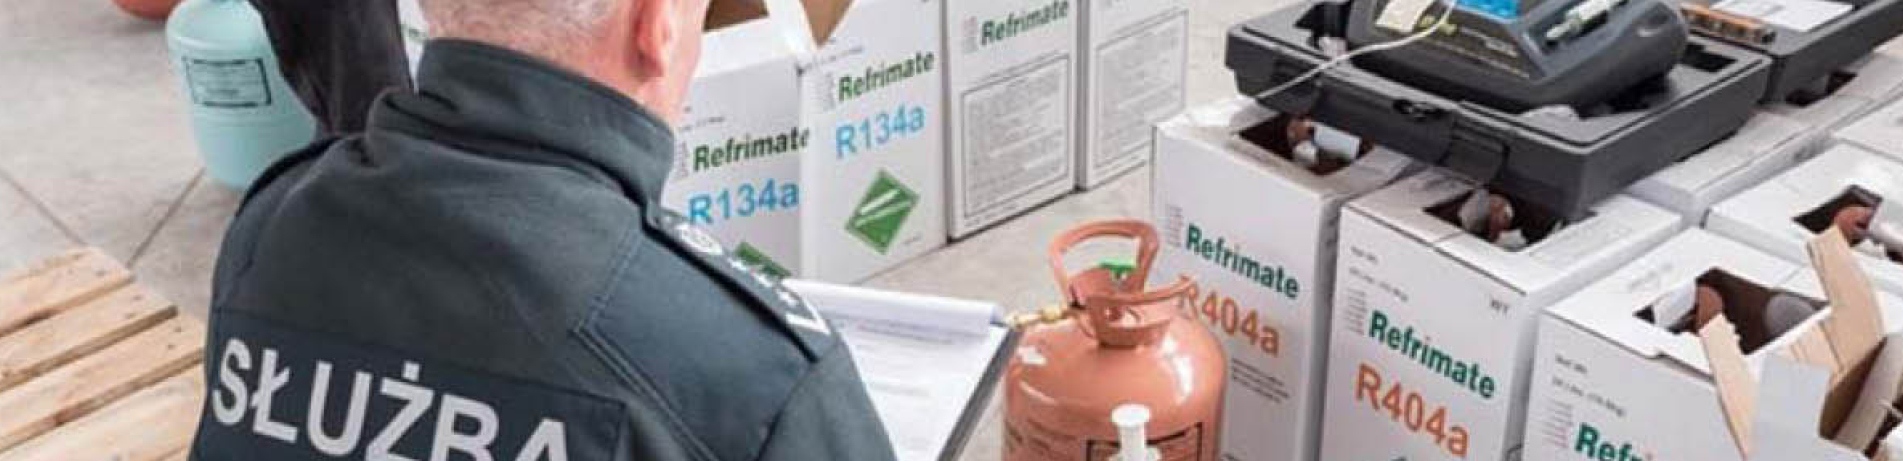 Polish official investigates refrigerant containers for illegal hydrofluorocarbons (HFCs)